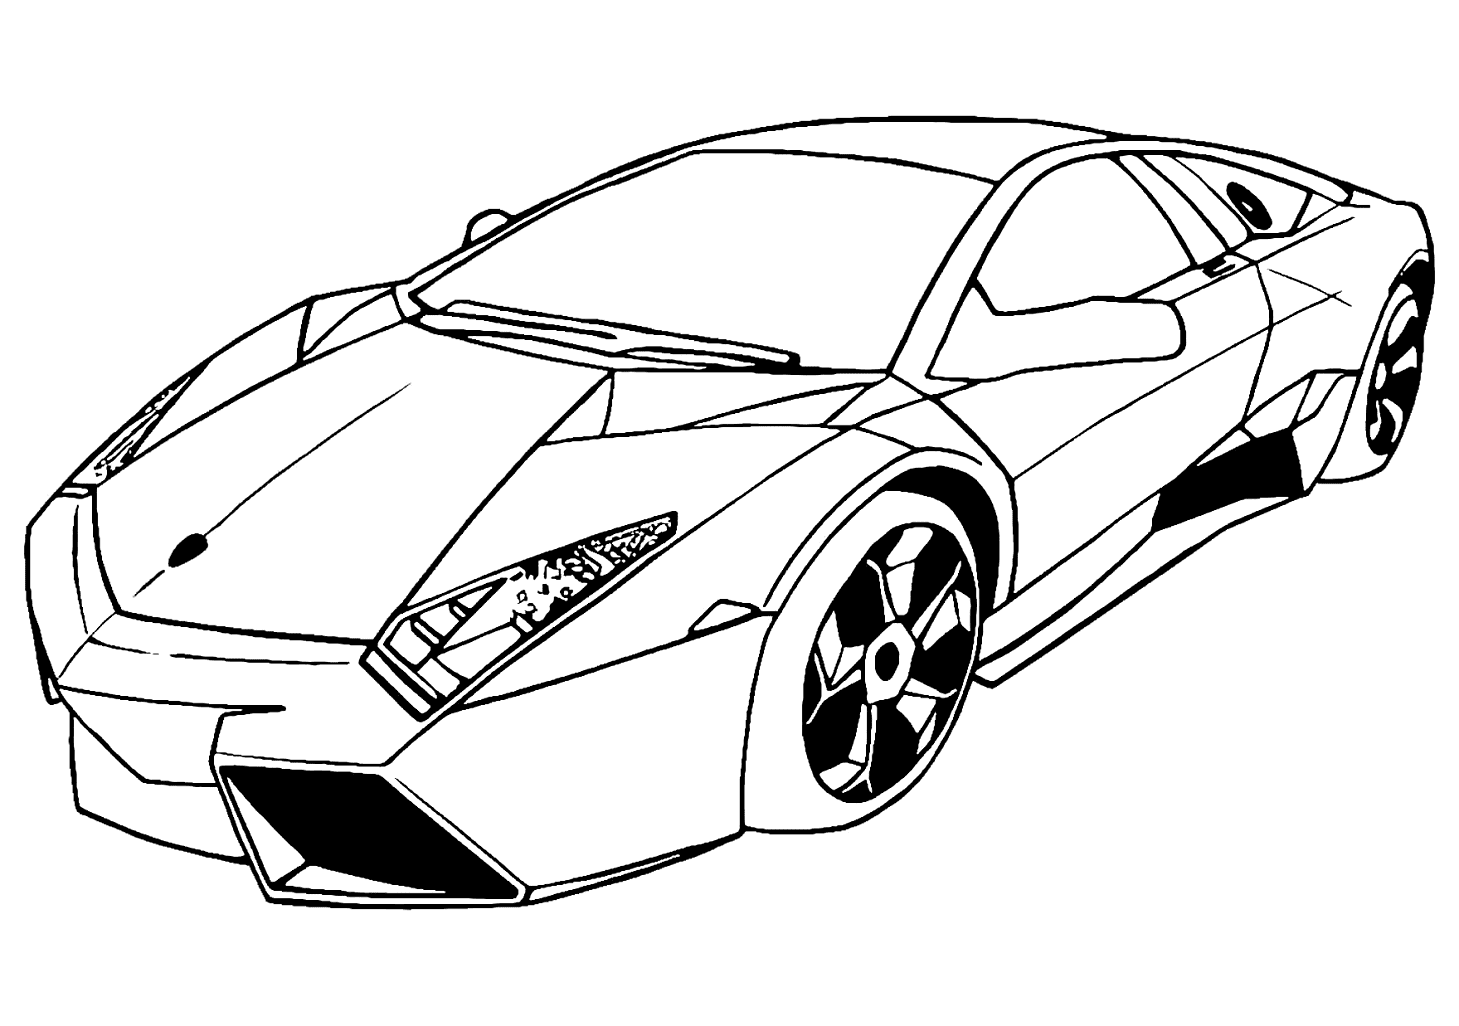 Race Car to Print Coloring Pages   Racing Car Coloring Pages ...